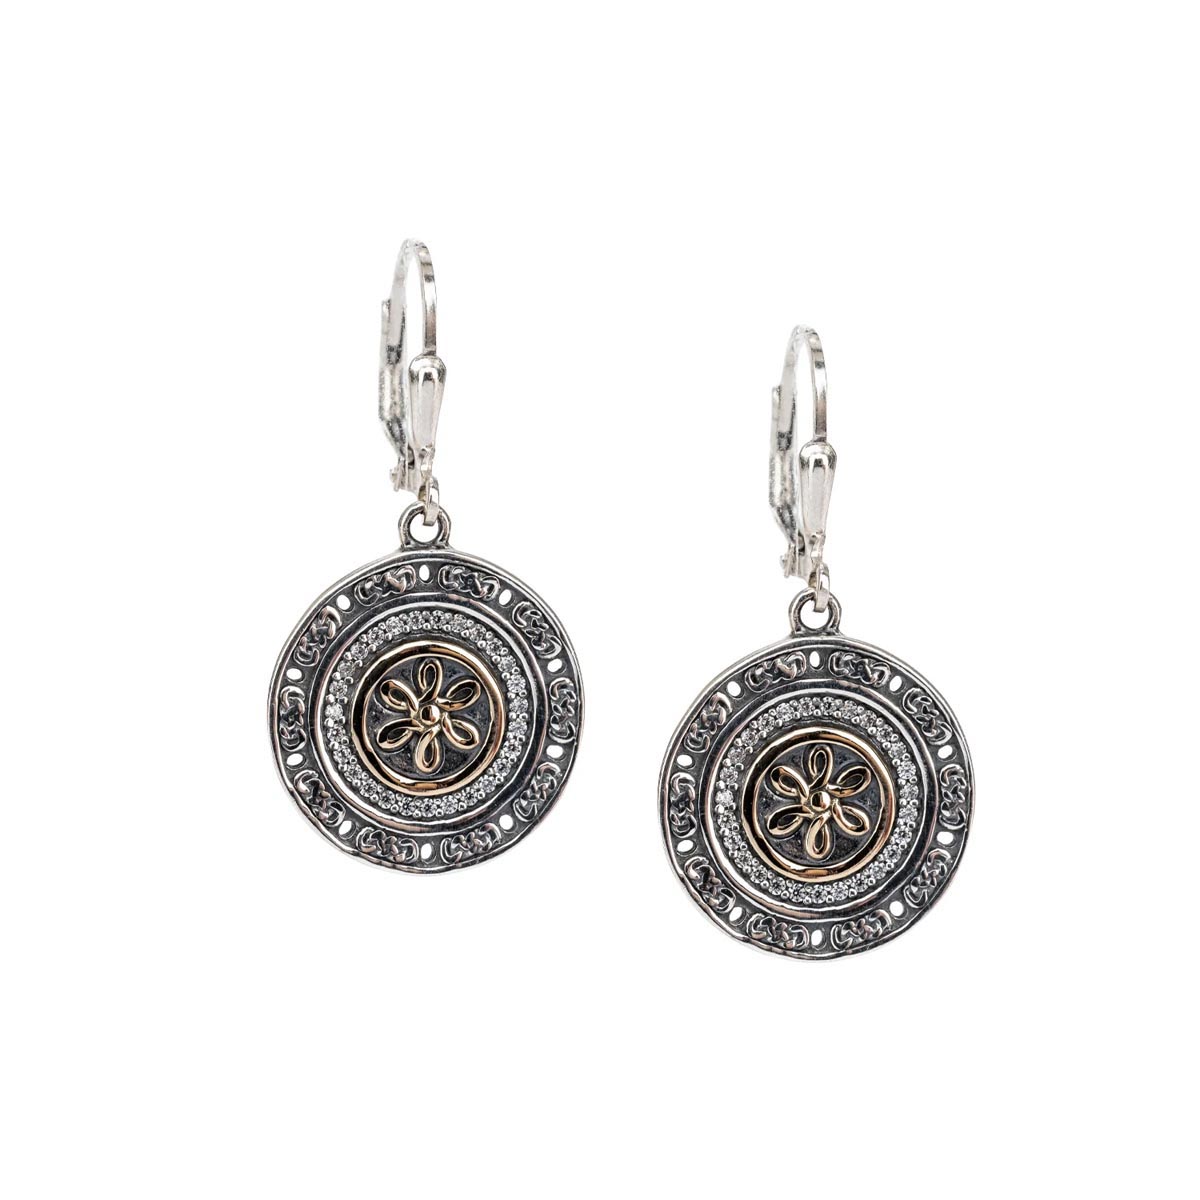 Keith Jack Eclipse Drop Earrings in Sterling Silver and 10kt Yellow Gold with Cubic Zirconia